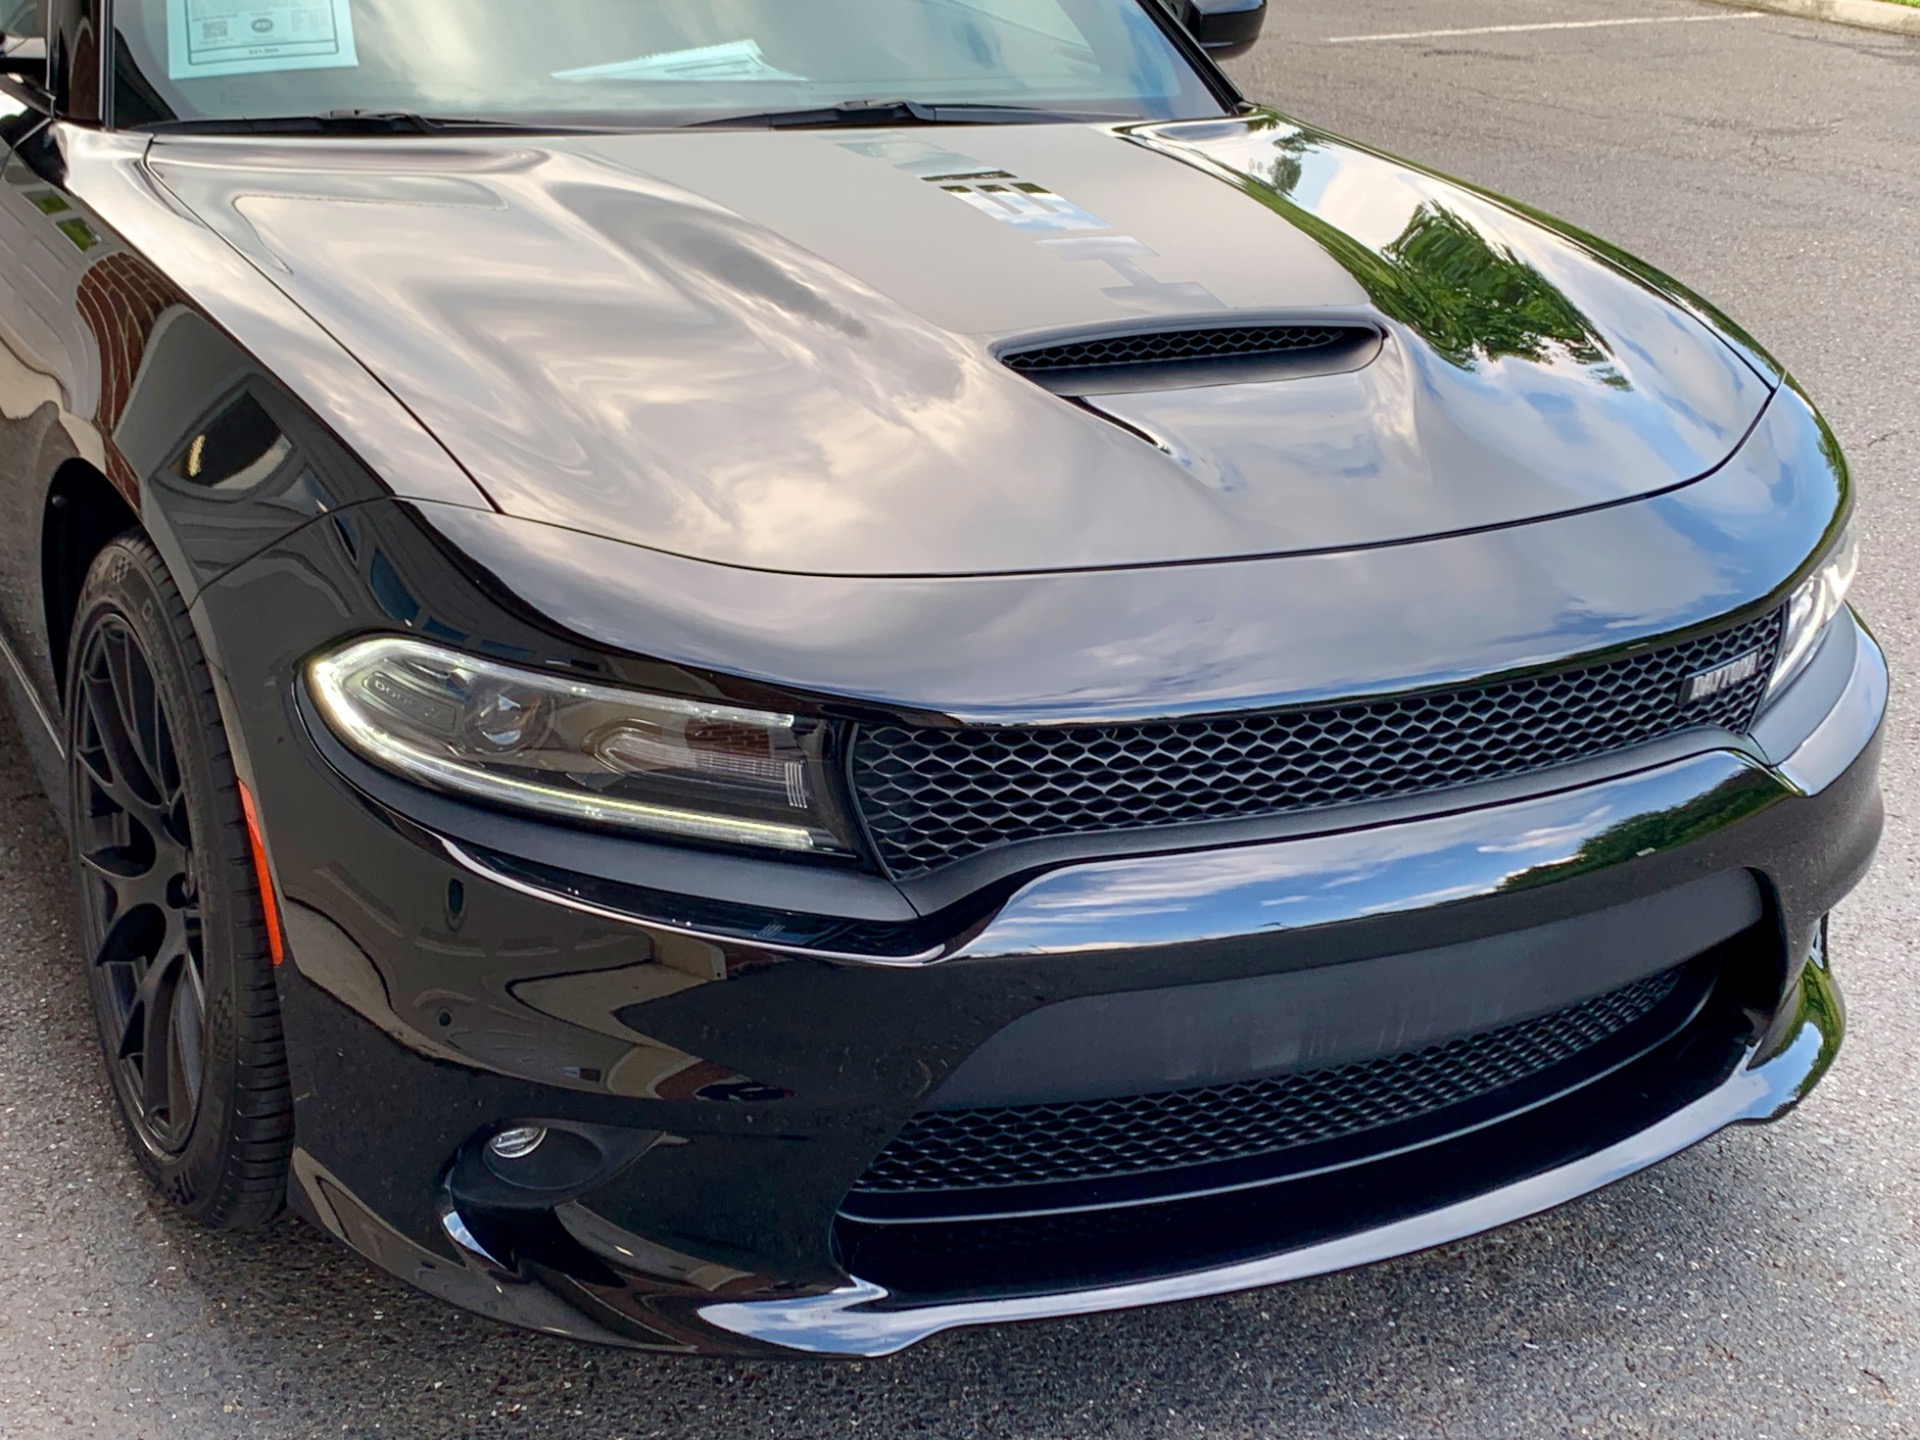 2017 Dodge Charger Daytona R/T Stock # 620836 for sale near Edgewater ...